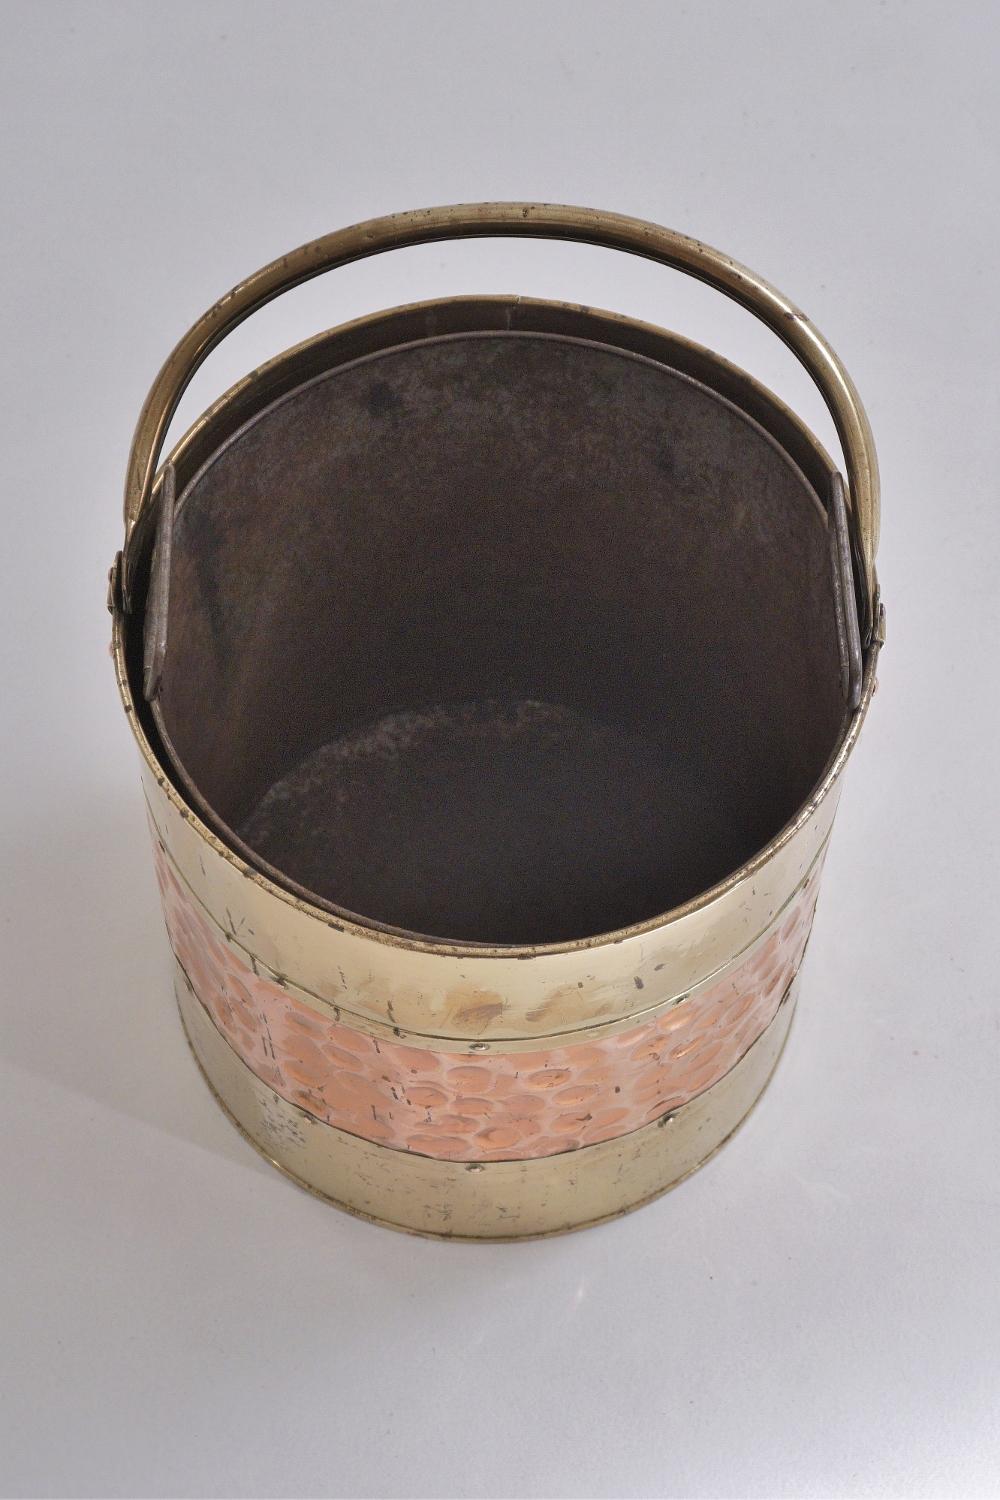 Antique Brass Bucket/Bin 'Coal Scuttle' with Copper Banding, circa 1900s English For Sale 3